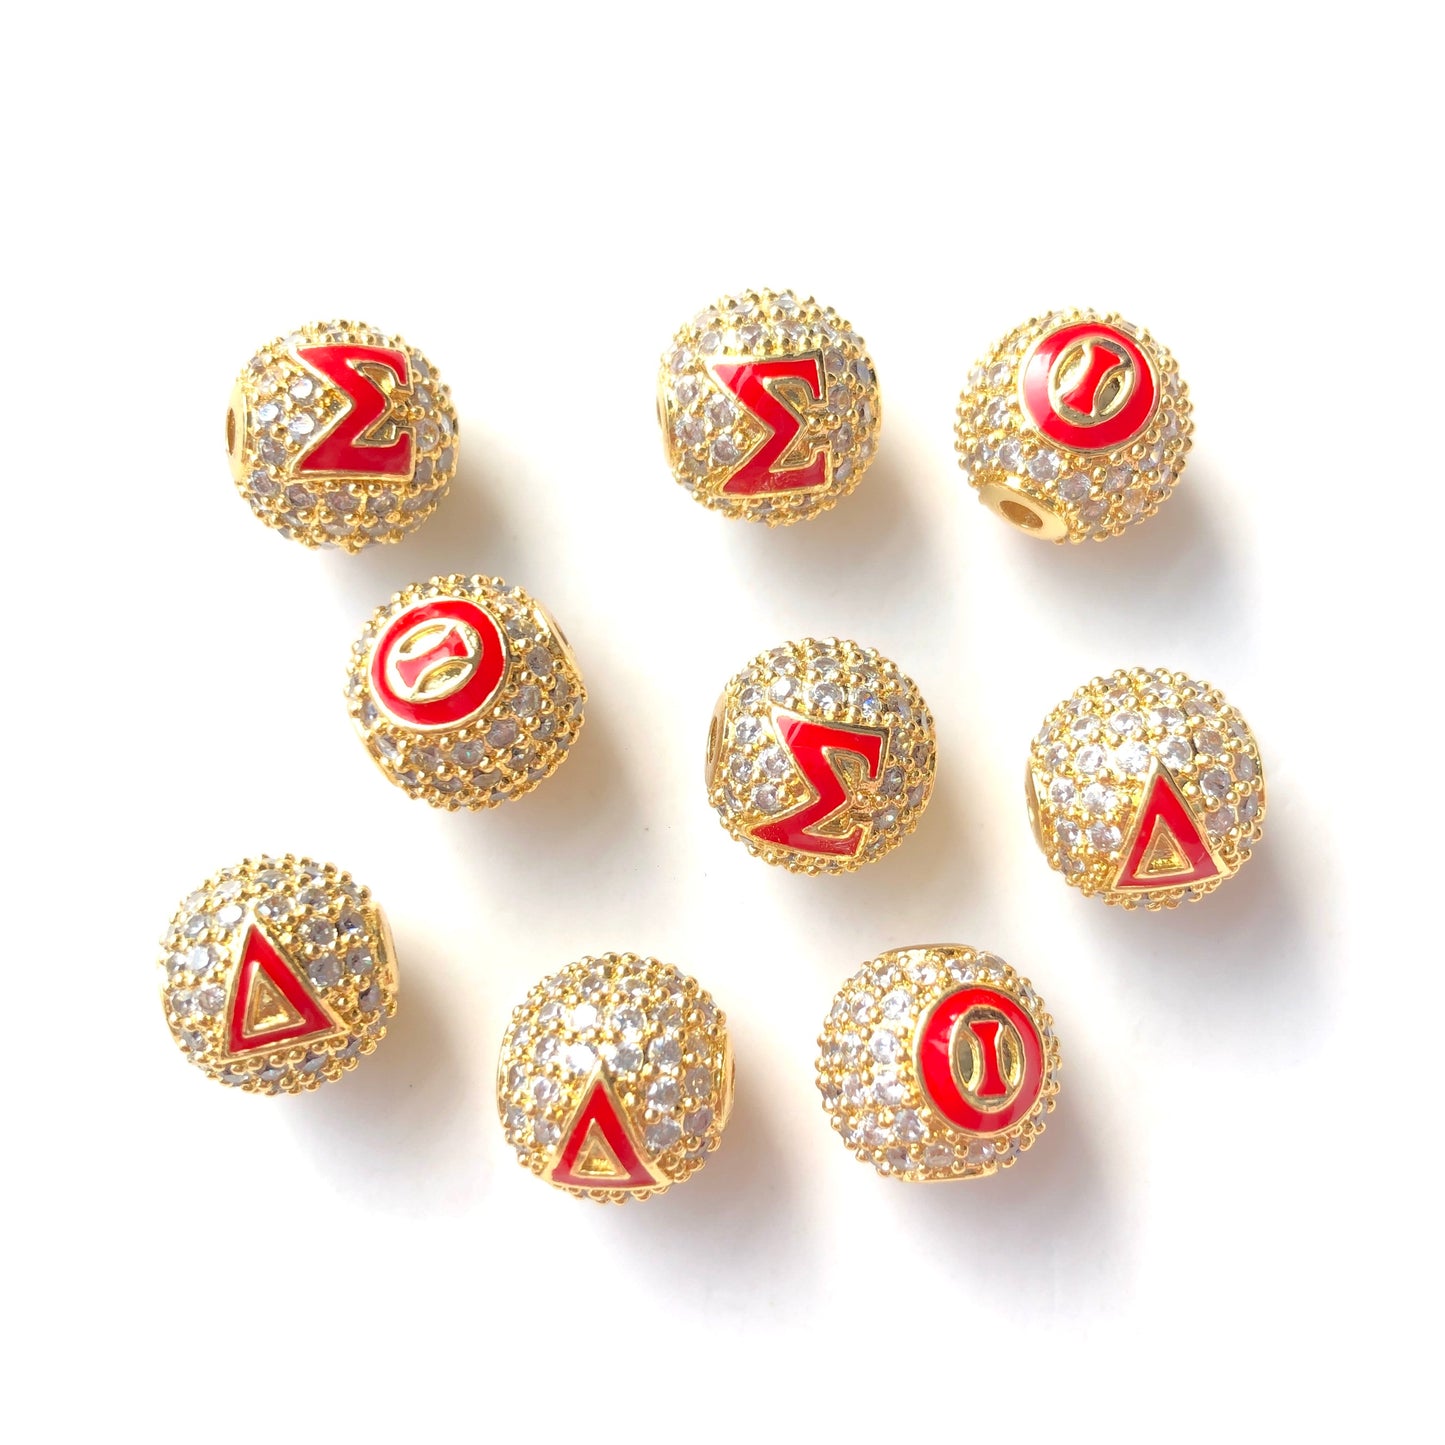 12pcs/lot 10mm Red Enamel CZ Paved Greek Letter "Δ", "Σ", "Θ" Ball Spacers Beads Mix Gold Letters 4 Letters Each CZ Paved Spacers 10mm Beads Ball Beads Greek Letters New Spacers Arrivals Charms Beads Beyond